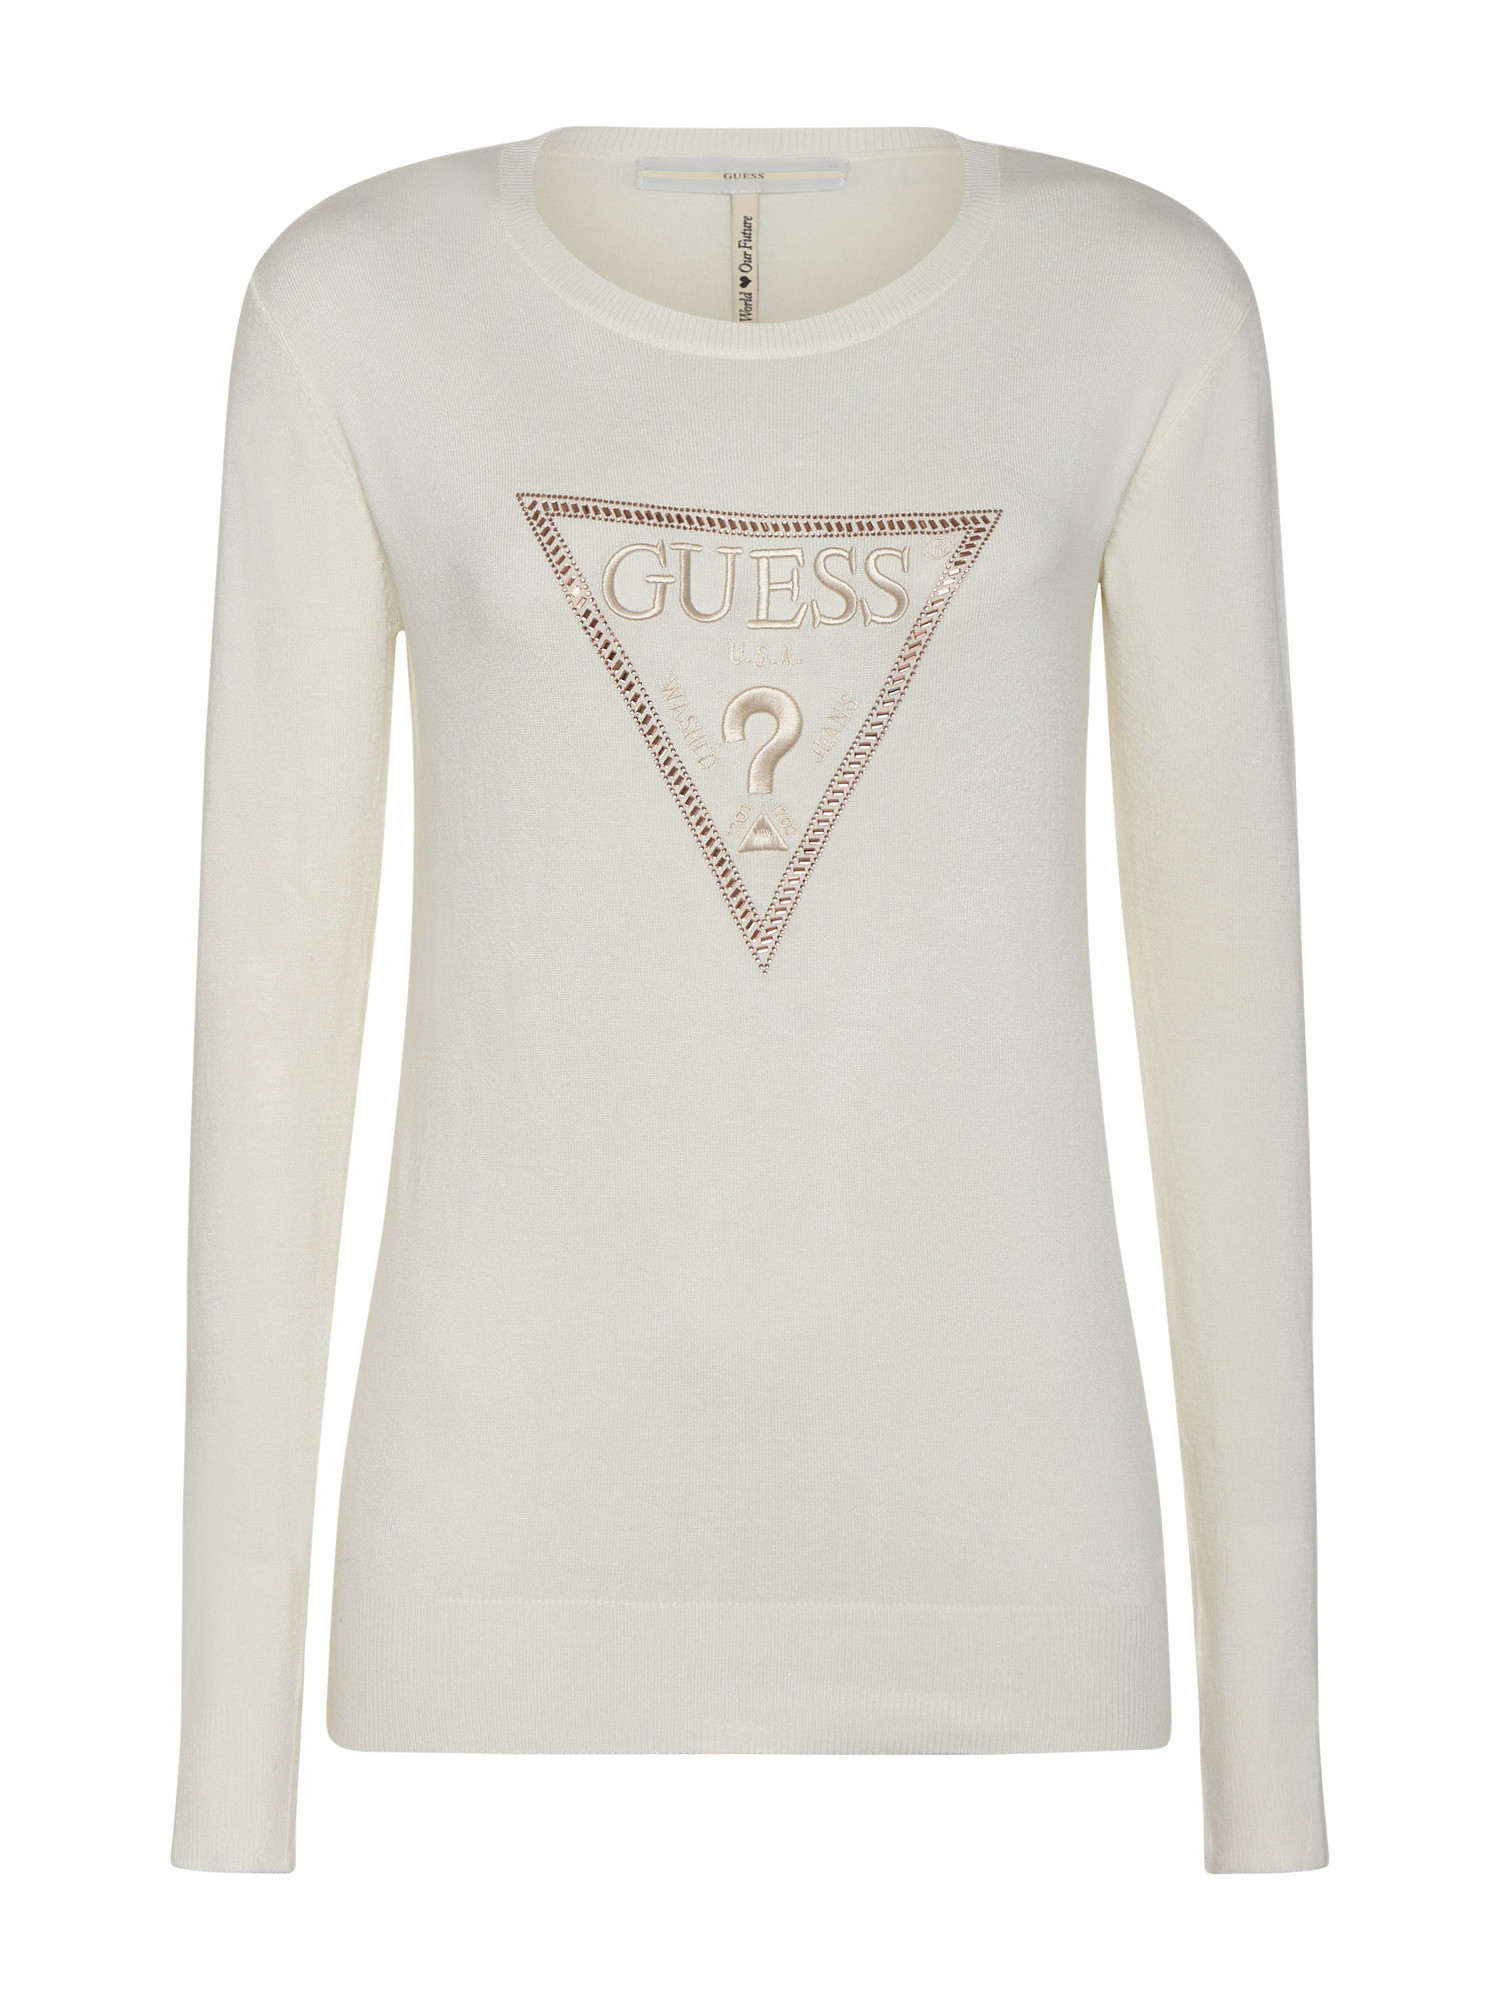 Guess - T-shirt with logo, Cream, large image number 0